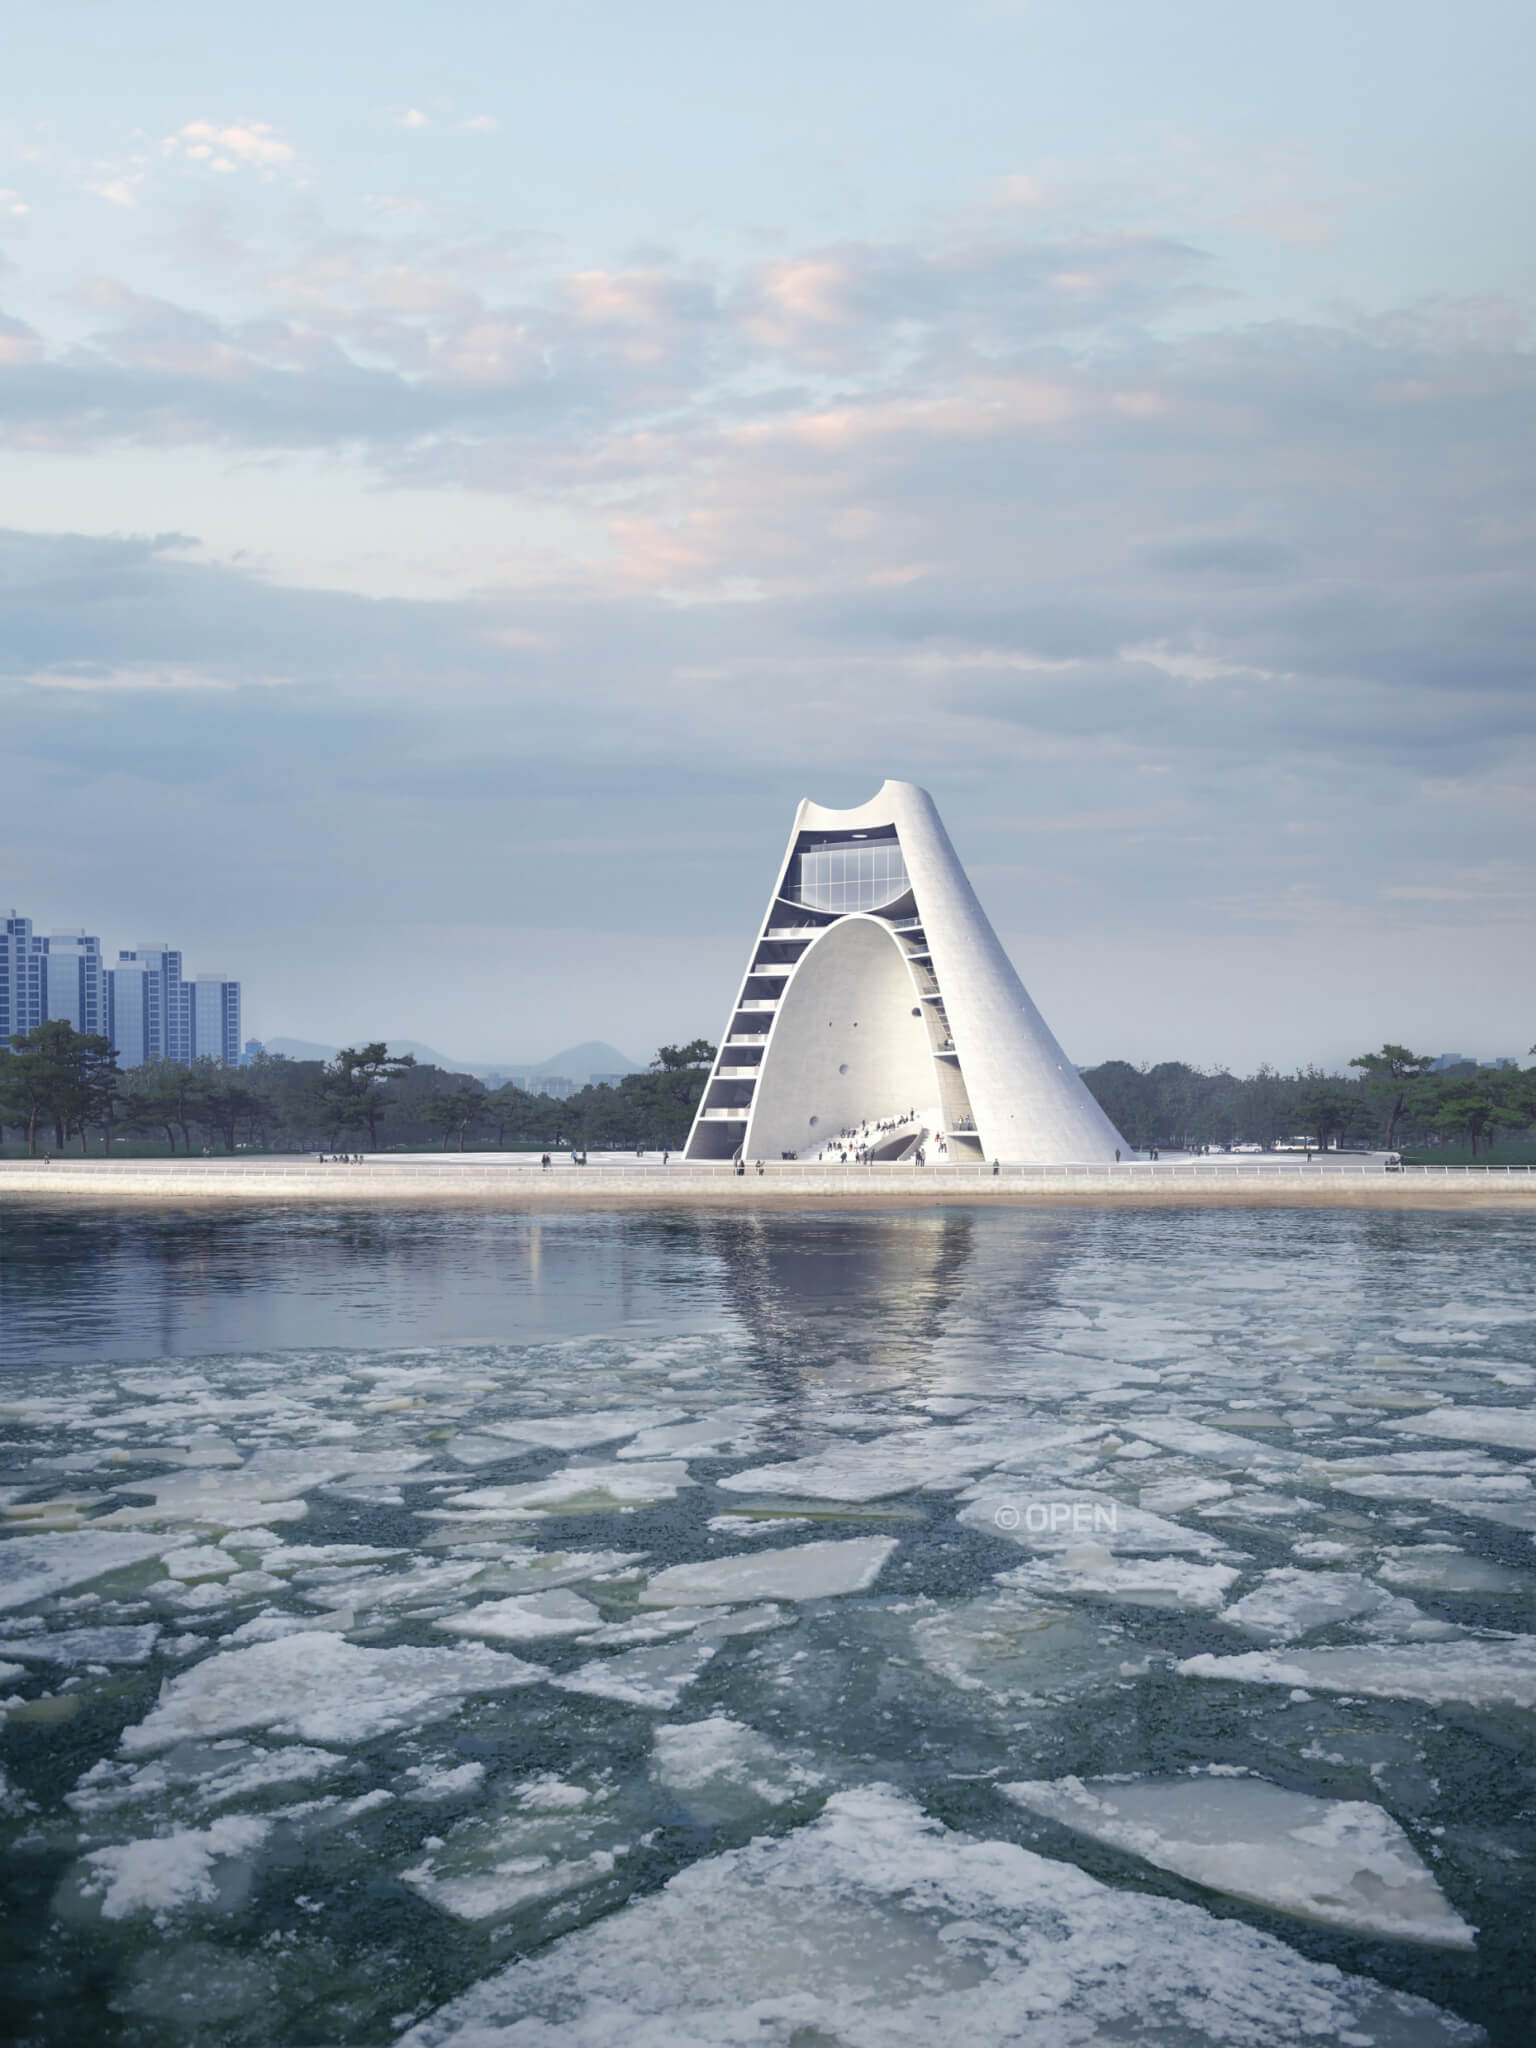 rendering of sun tower building out on water